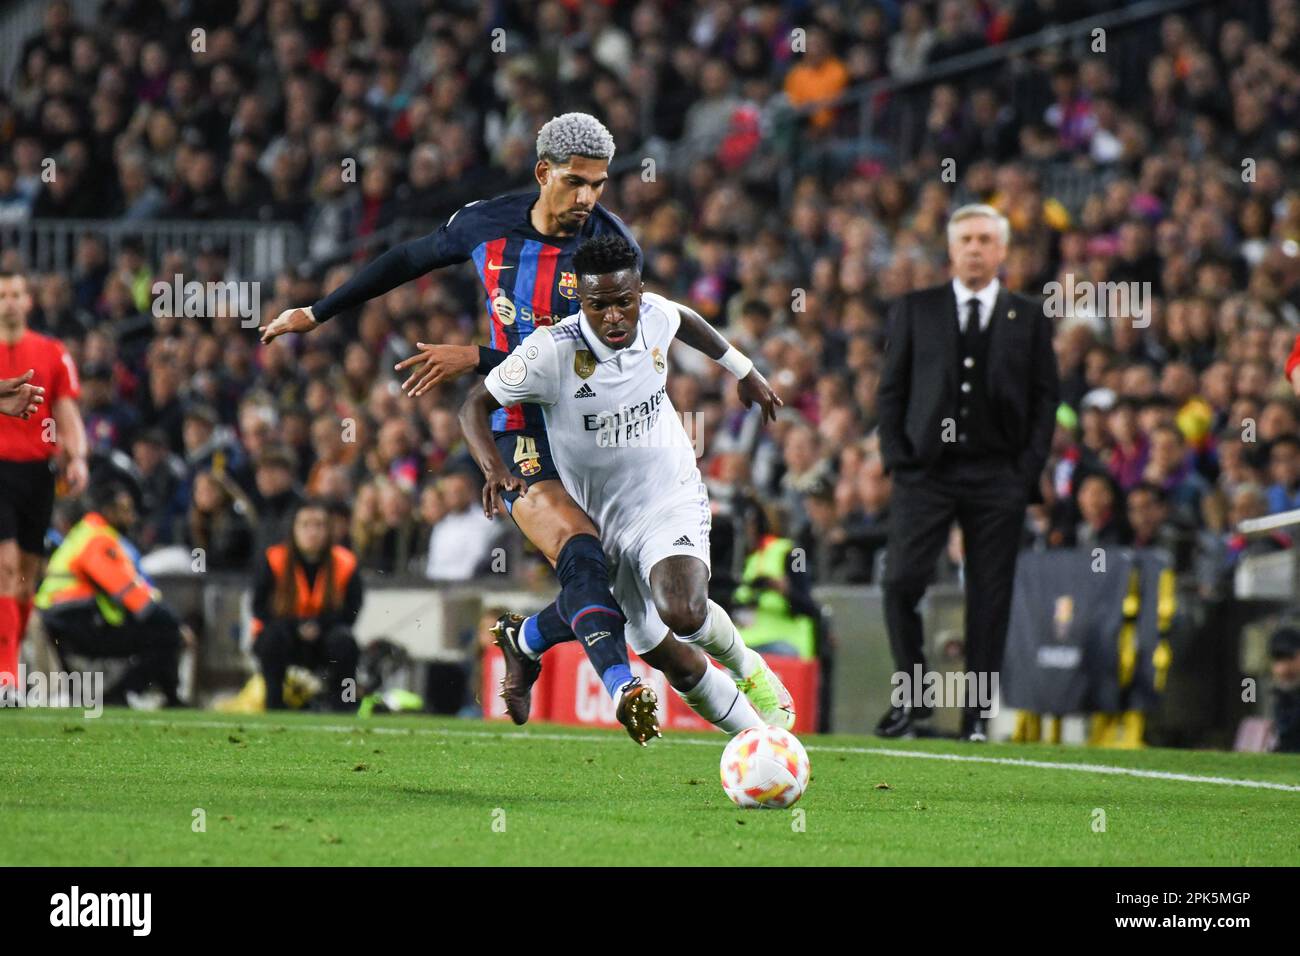 MADRID, SPAIN - MARCH 5: Match between FC Barcelona and Real Madrid CF as part of Semi-Final (Leg 2 of 2) of Copa Del Rey at Spotify Camp Nou Stadium, on March 5, 2023, in Barcelona, Spain. (Photo by Sara Aribó/PxImages) Stock Photo